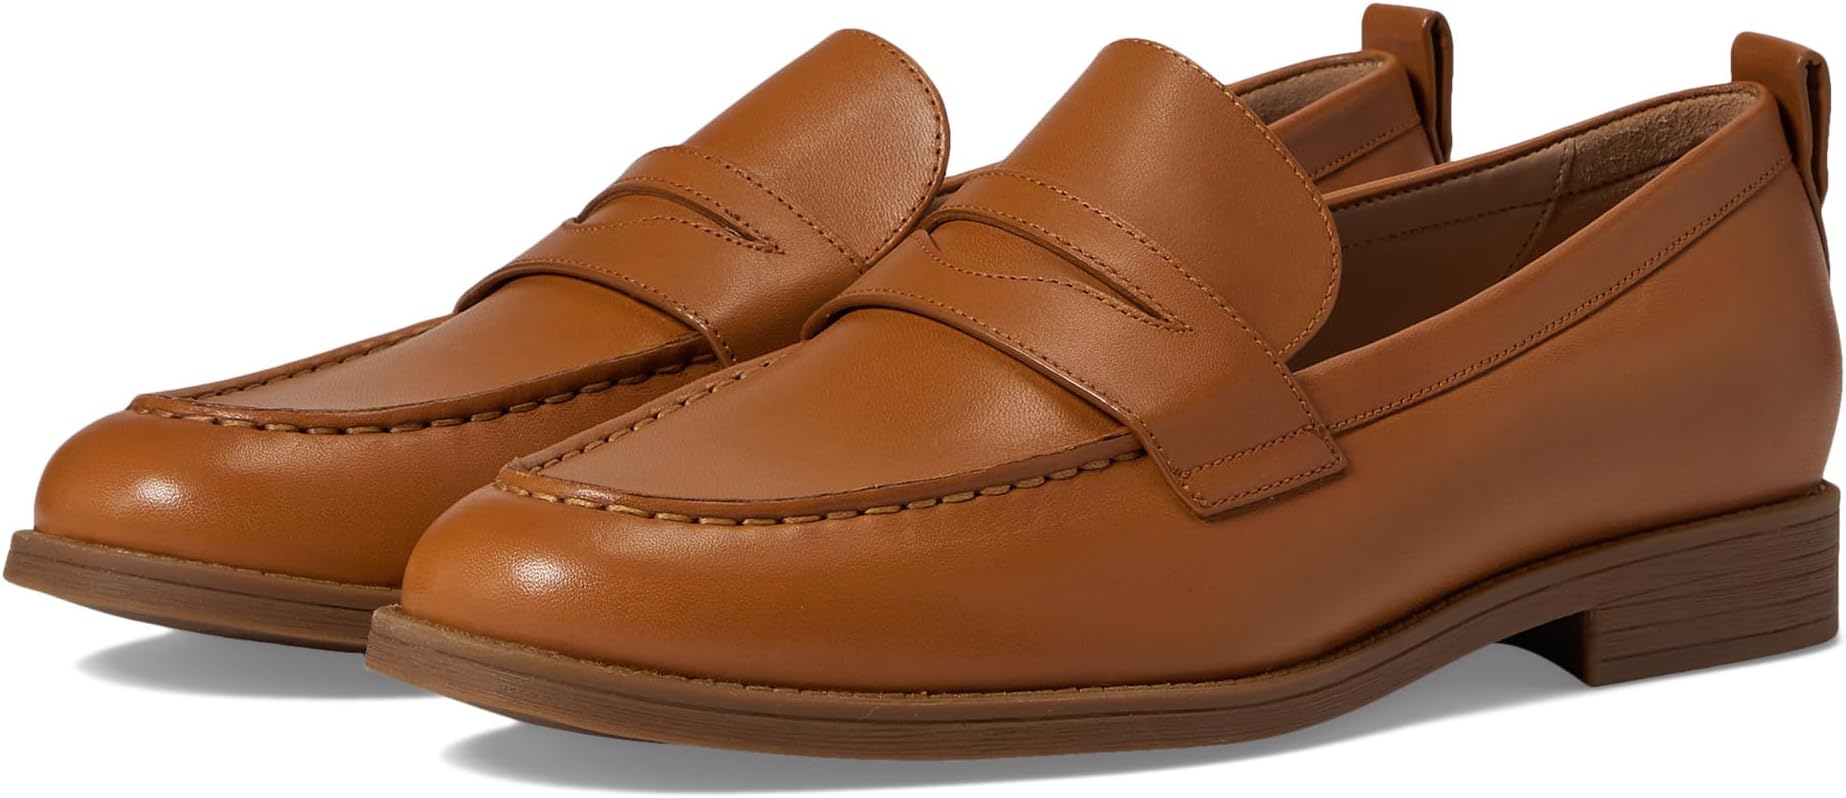 Лоферы Stassi Penny Loafer Cole Haan, цвет Pecan Leather